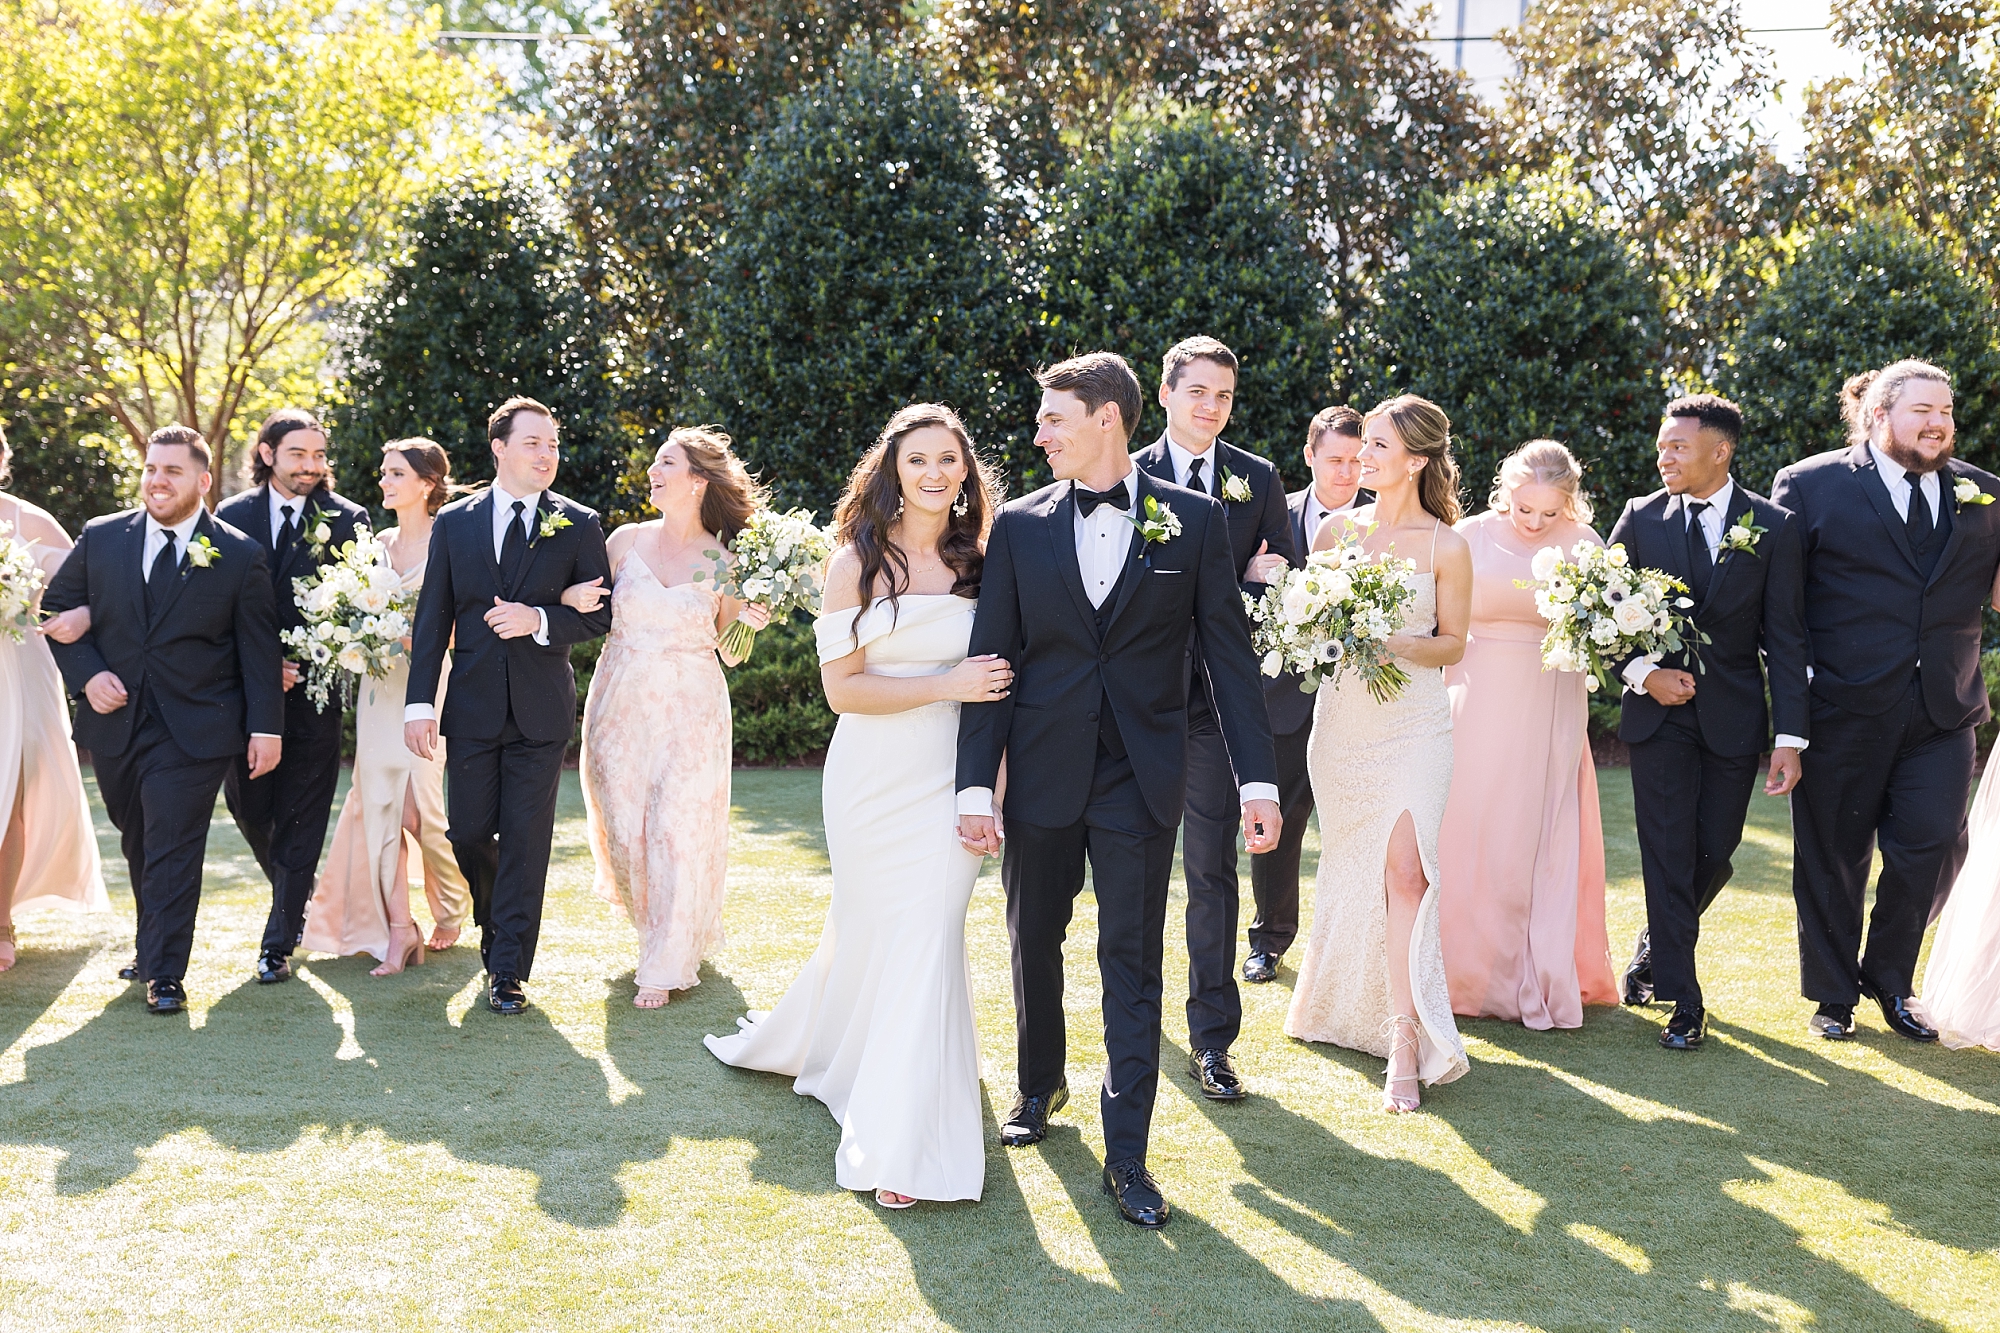 The bridal party walking together on the lawn  | Merrimon Wynne Wedding | Sarah Hinckley Photography | Raleigh NC Wedding Photographer